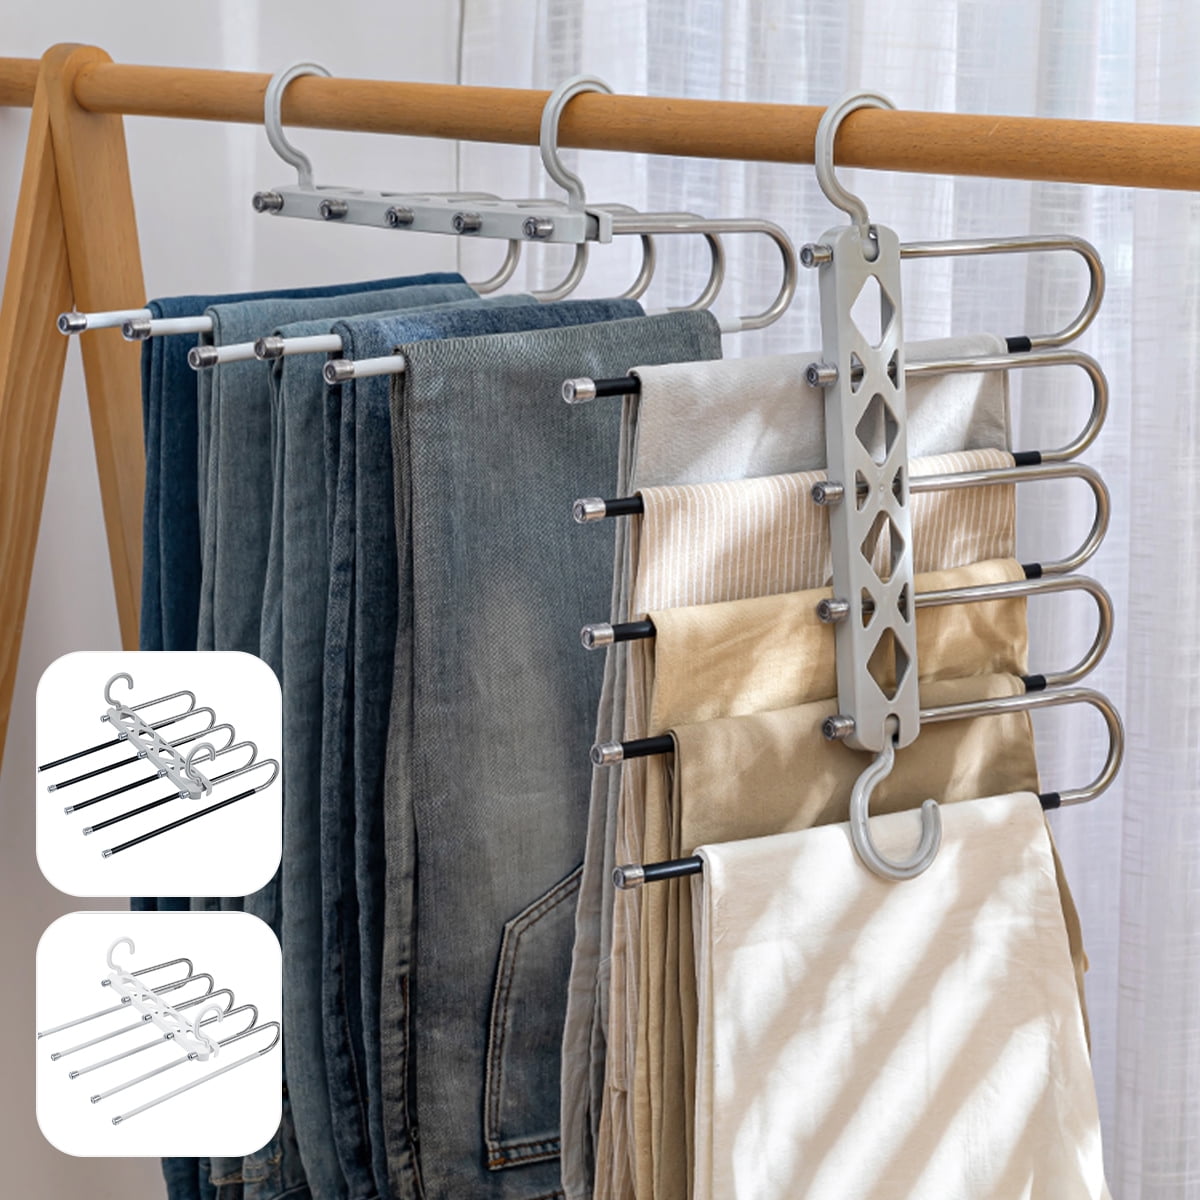 Trousers Jeans Scarf Hanger- Space-Saving Pants Hangers for Women and Men by ERA Accents 4 Tier Black Pant Hangers Open-Ended Metal Pants Hangers Space Saving Non-Slip Hangers for Pants Slacks 